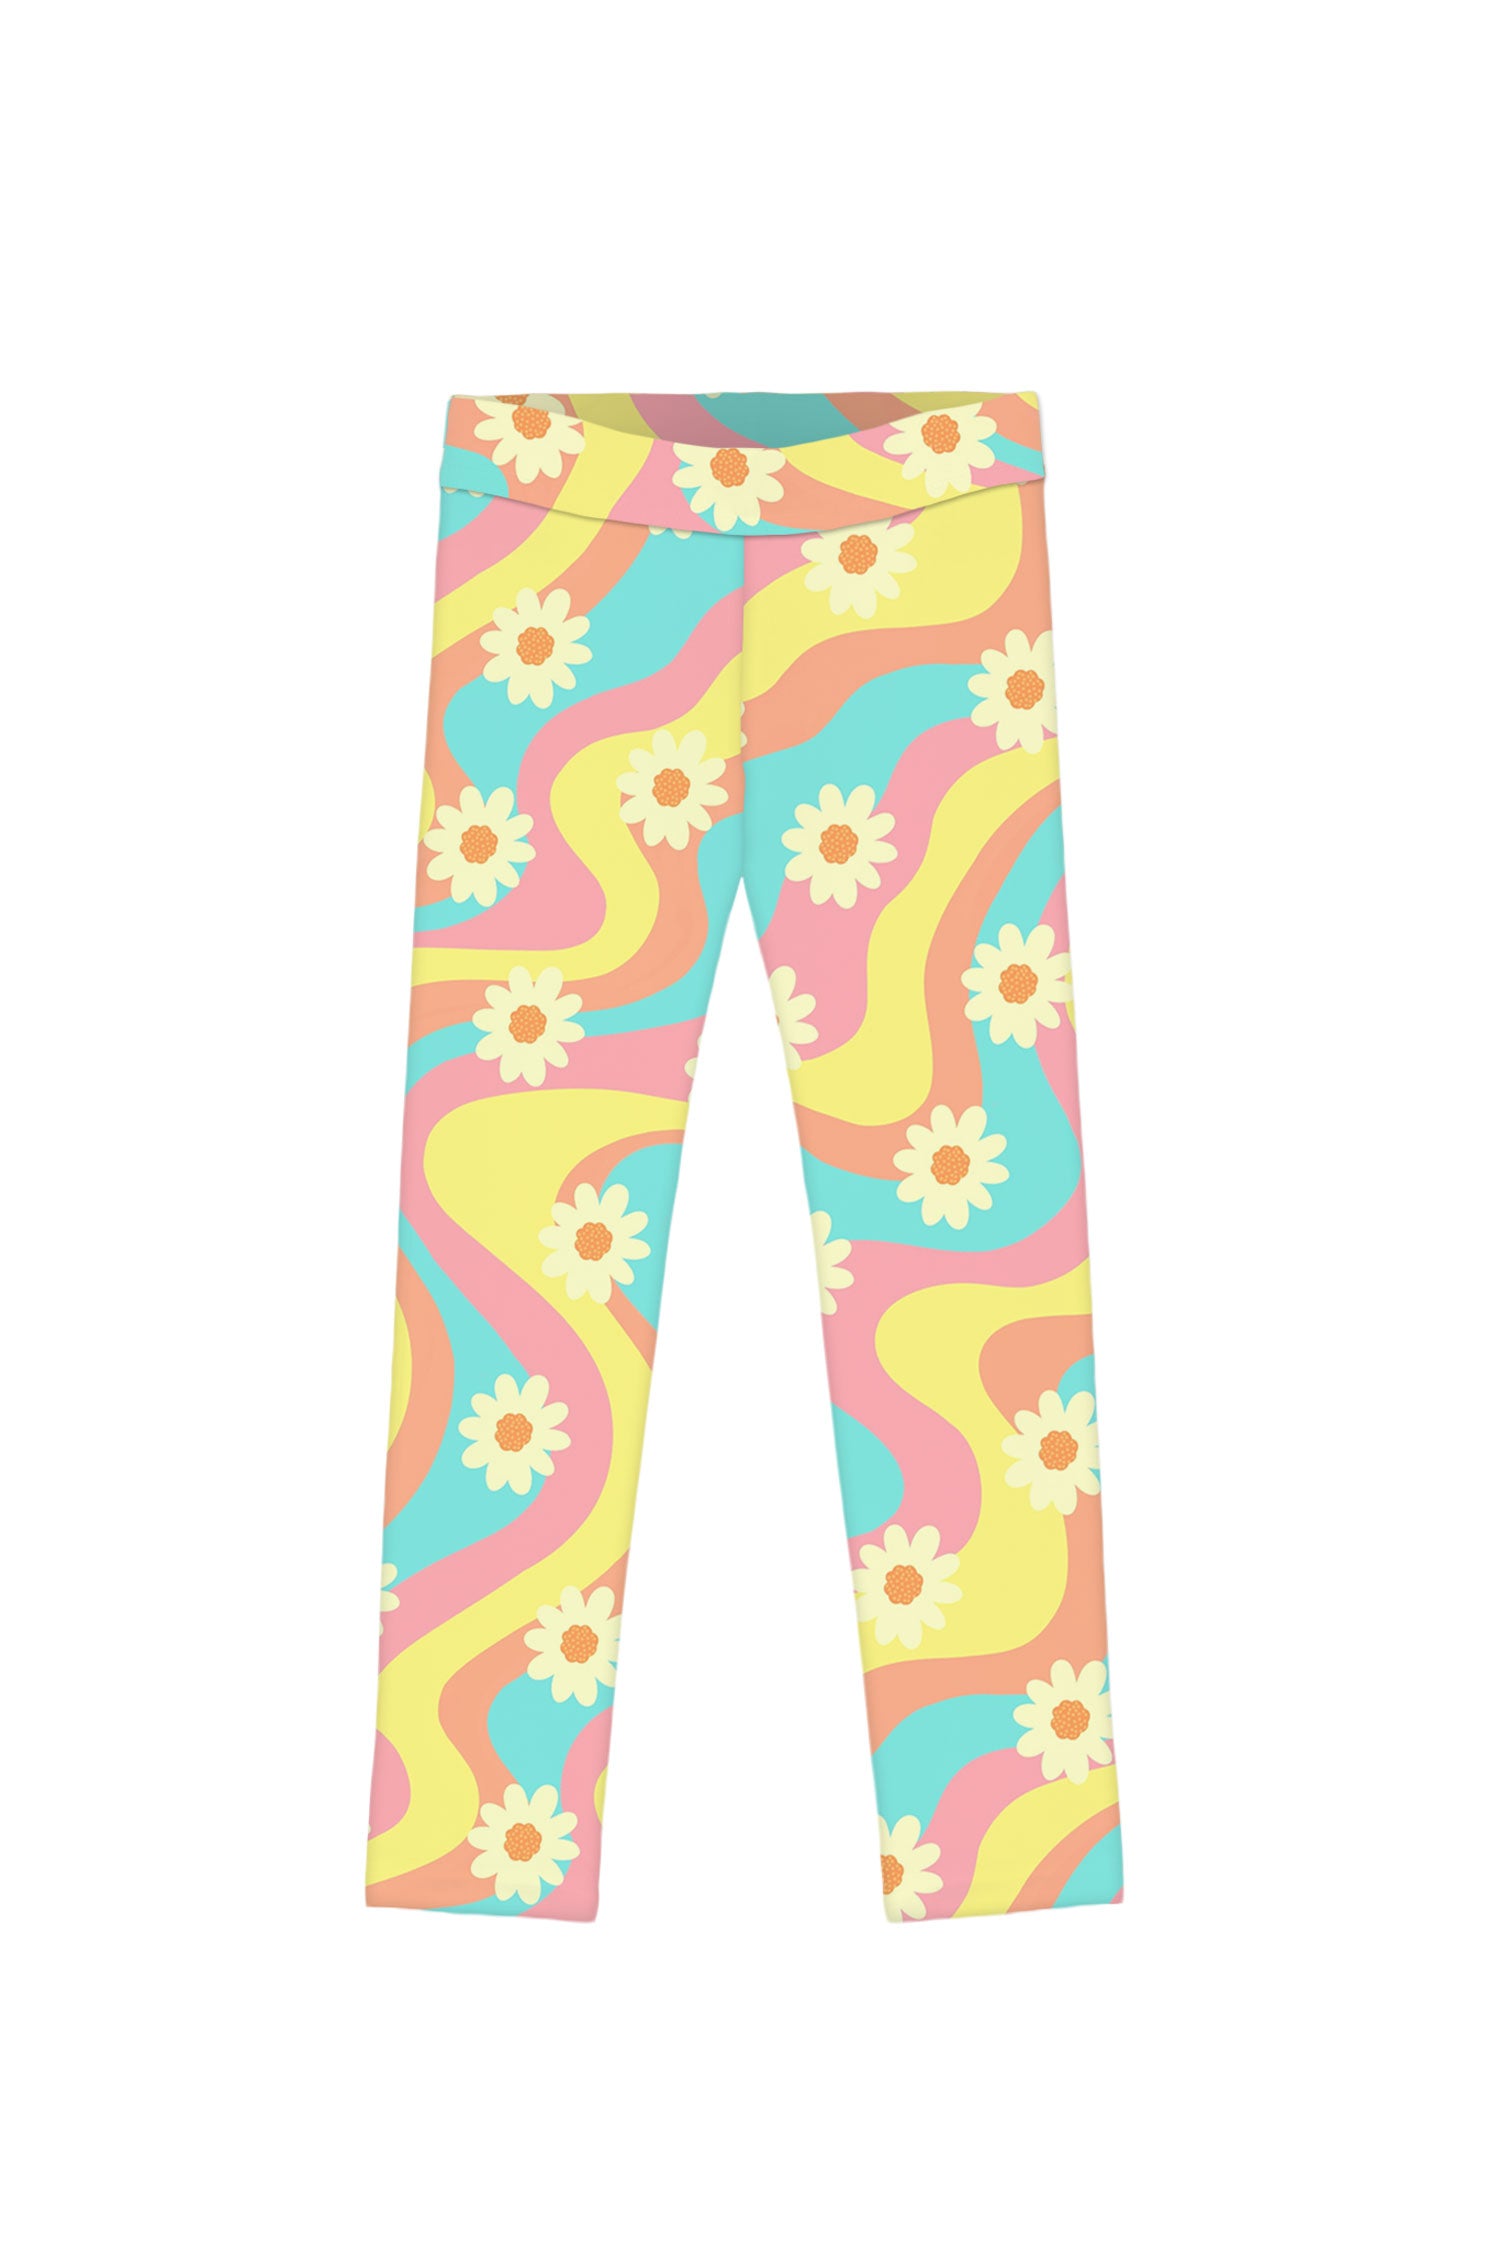 Festival Girl Lucy Yellow Floral Print Summer Sporty Leggings - Girls - Pineapple Clothing